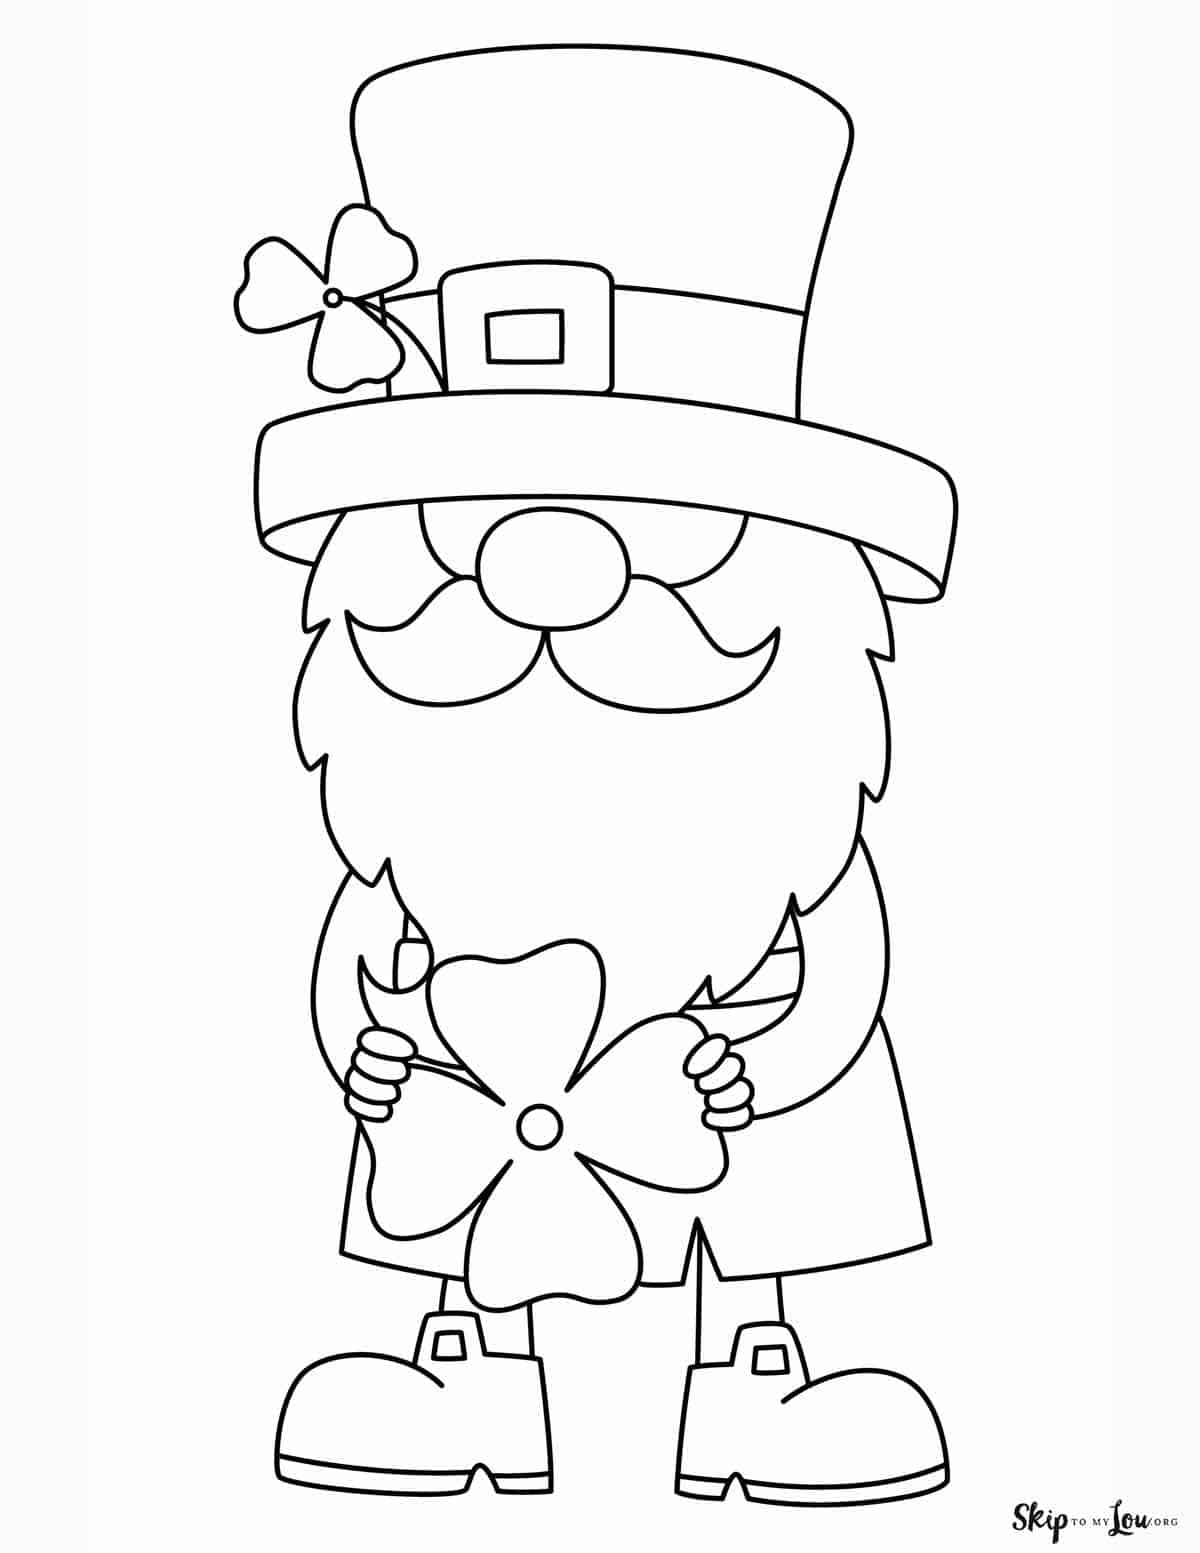 Leprechaun coloring pages skip to my lou